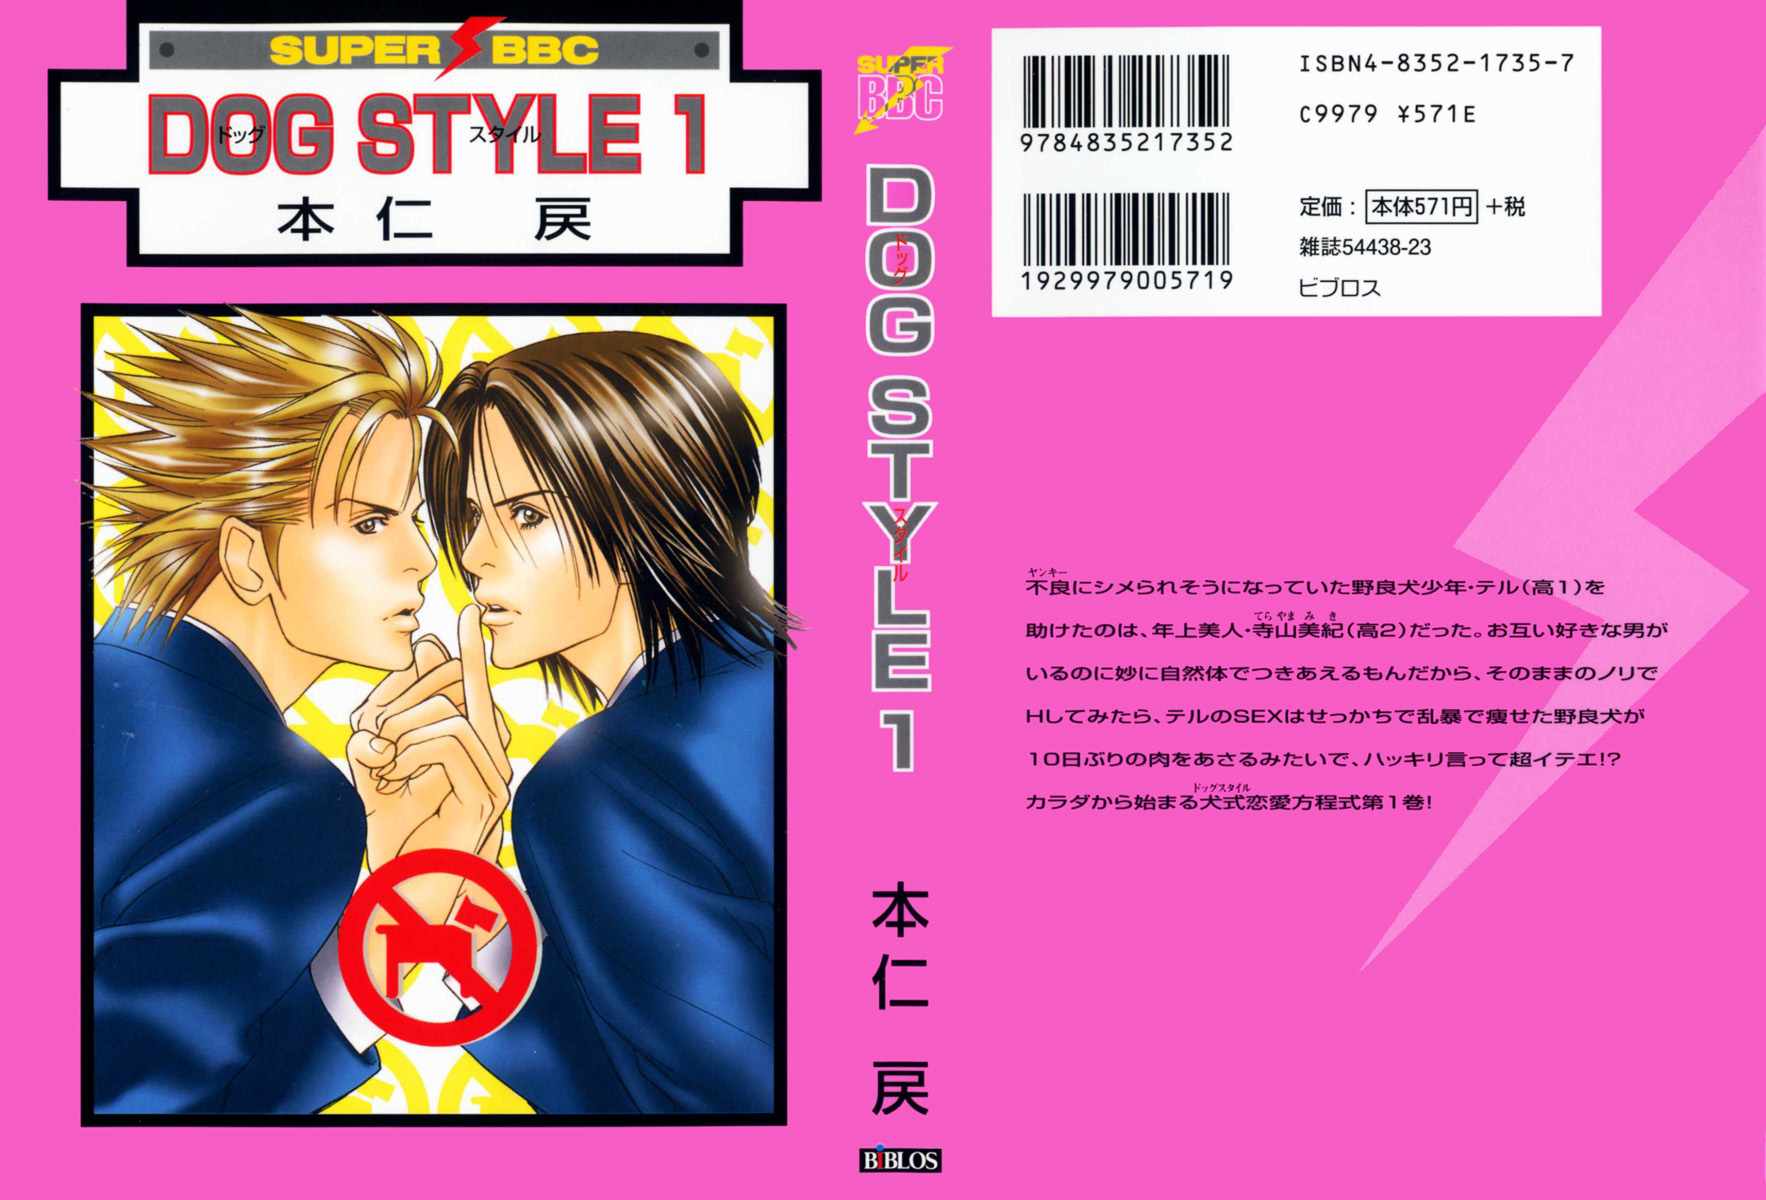 Dog Style - 000 cover.jpg